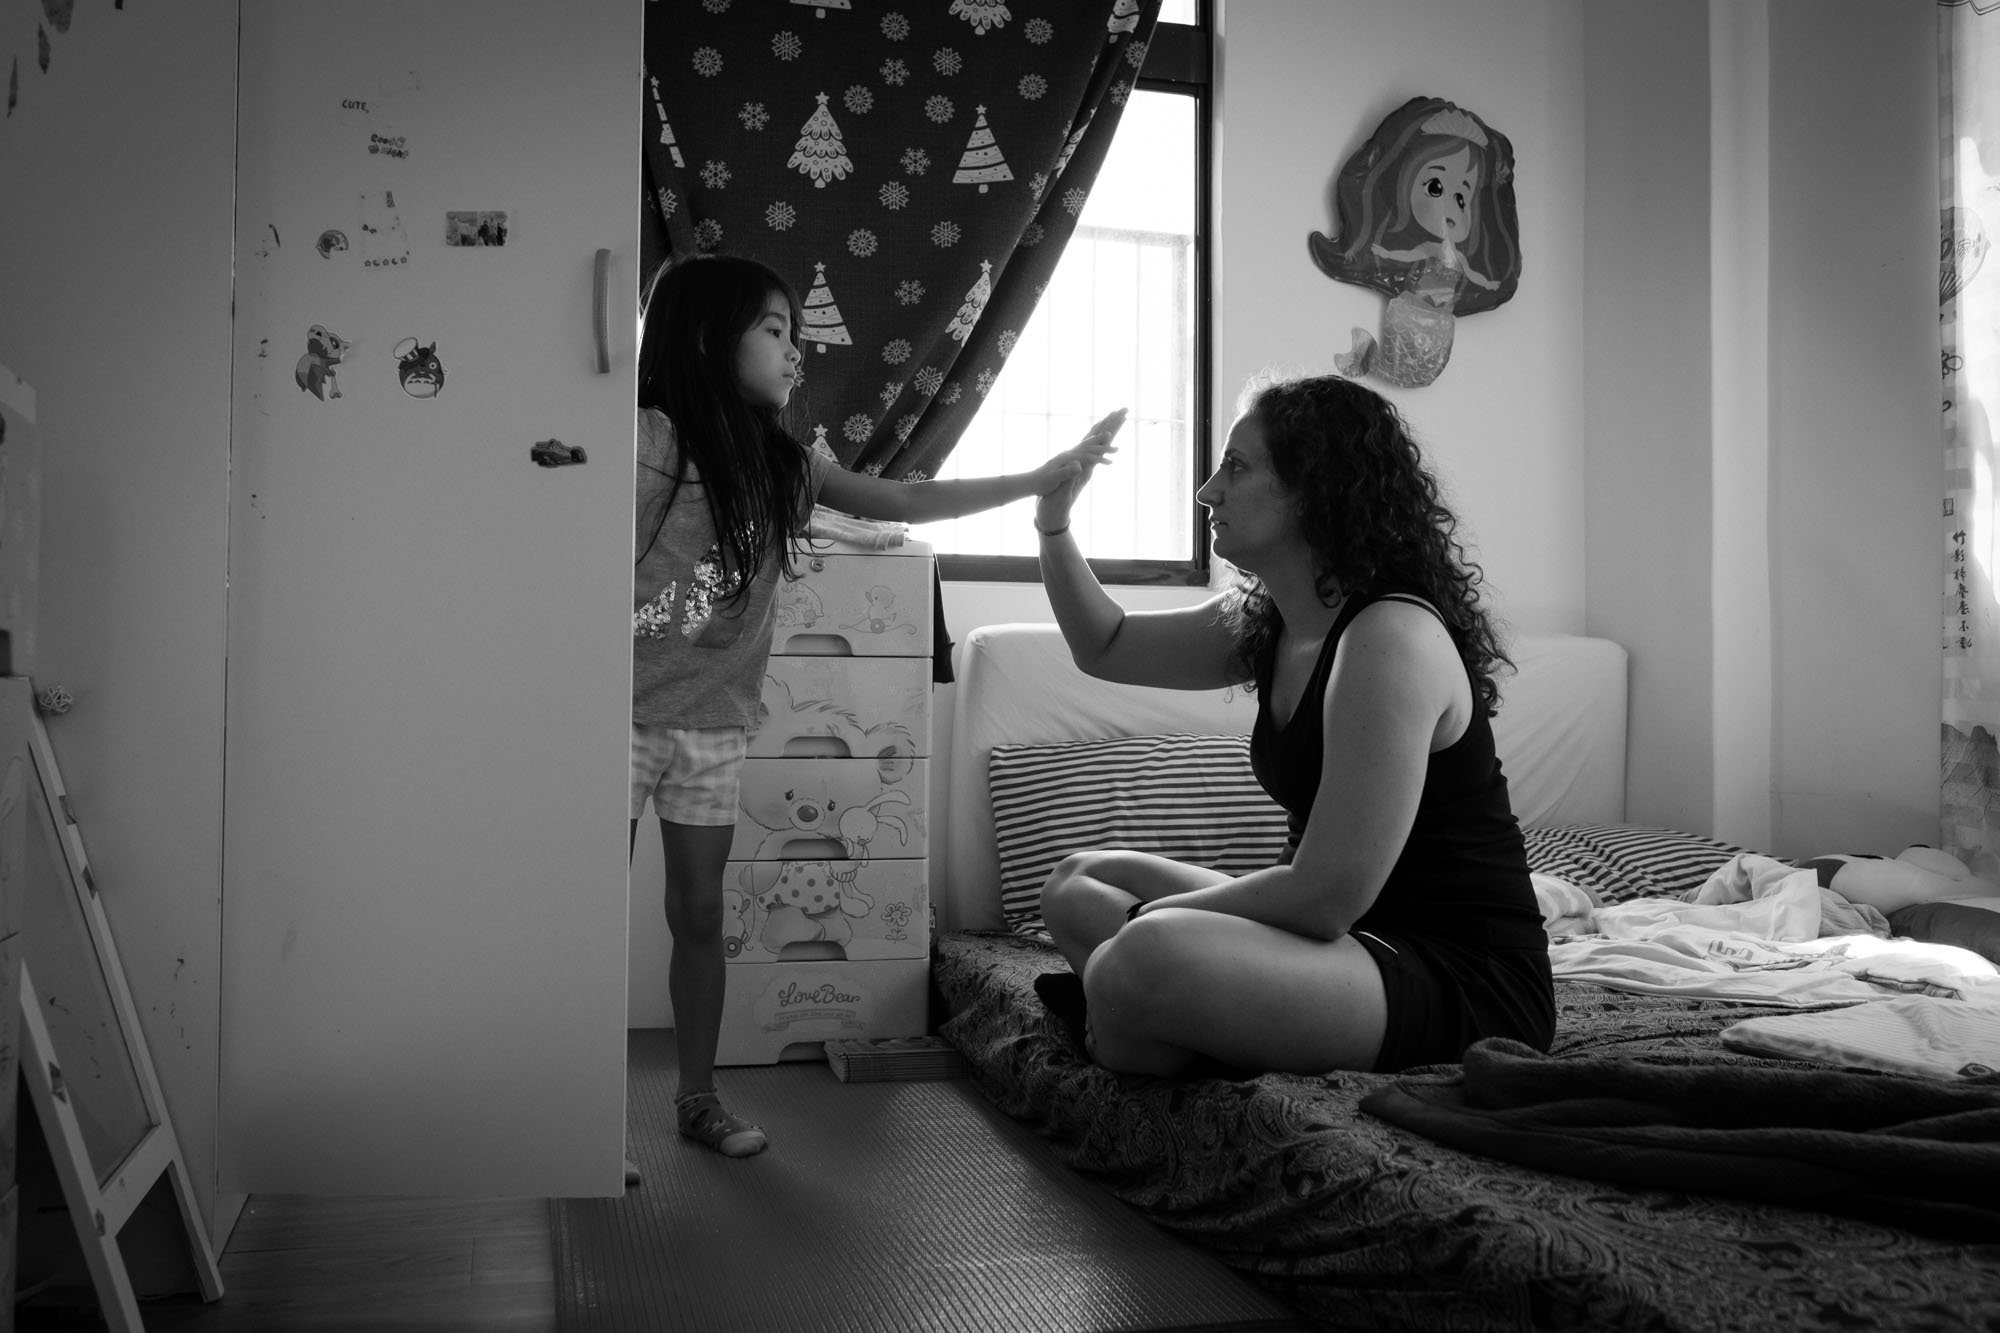 A mother and daughter give each other five in the daughter's bedroom in Taipei, Taiwan.